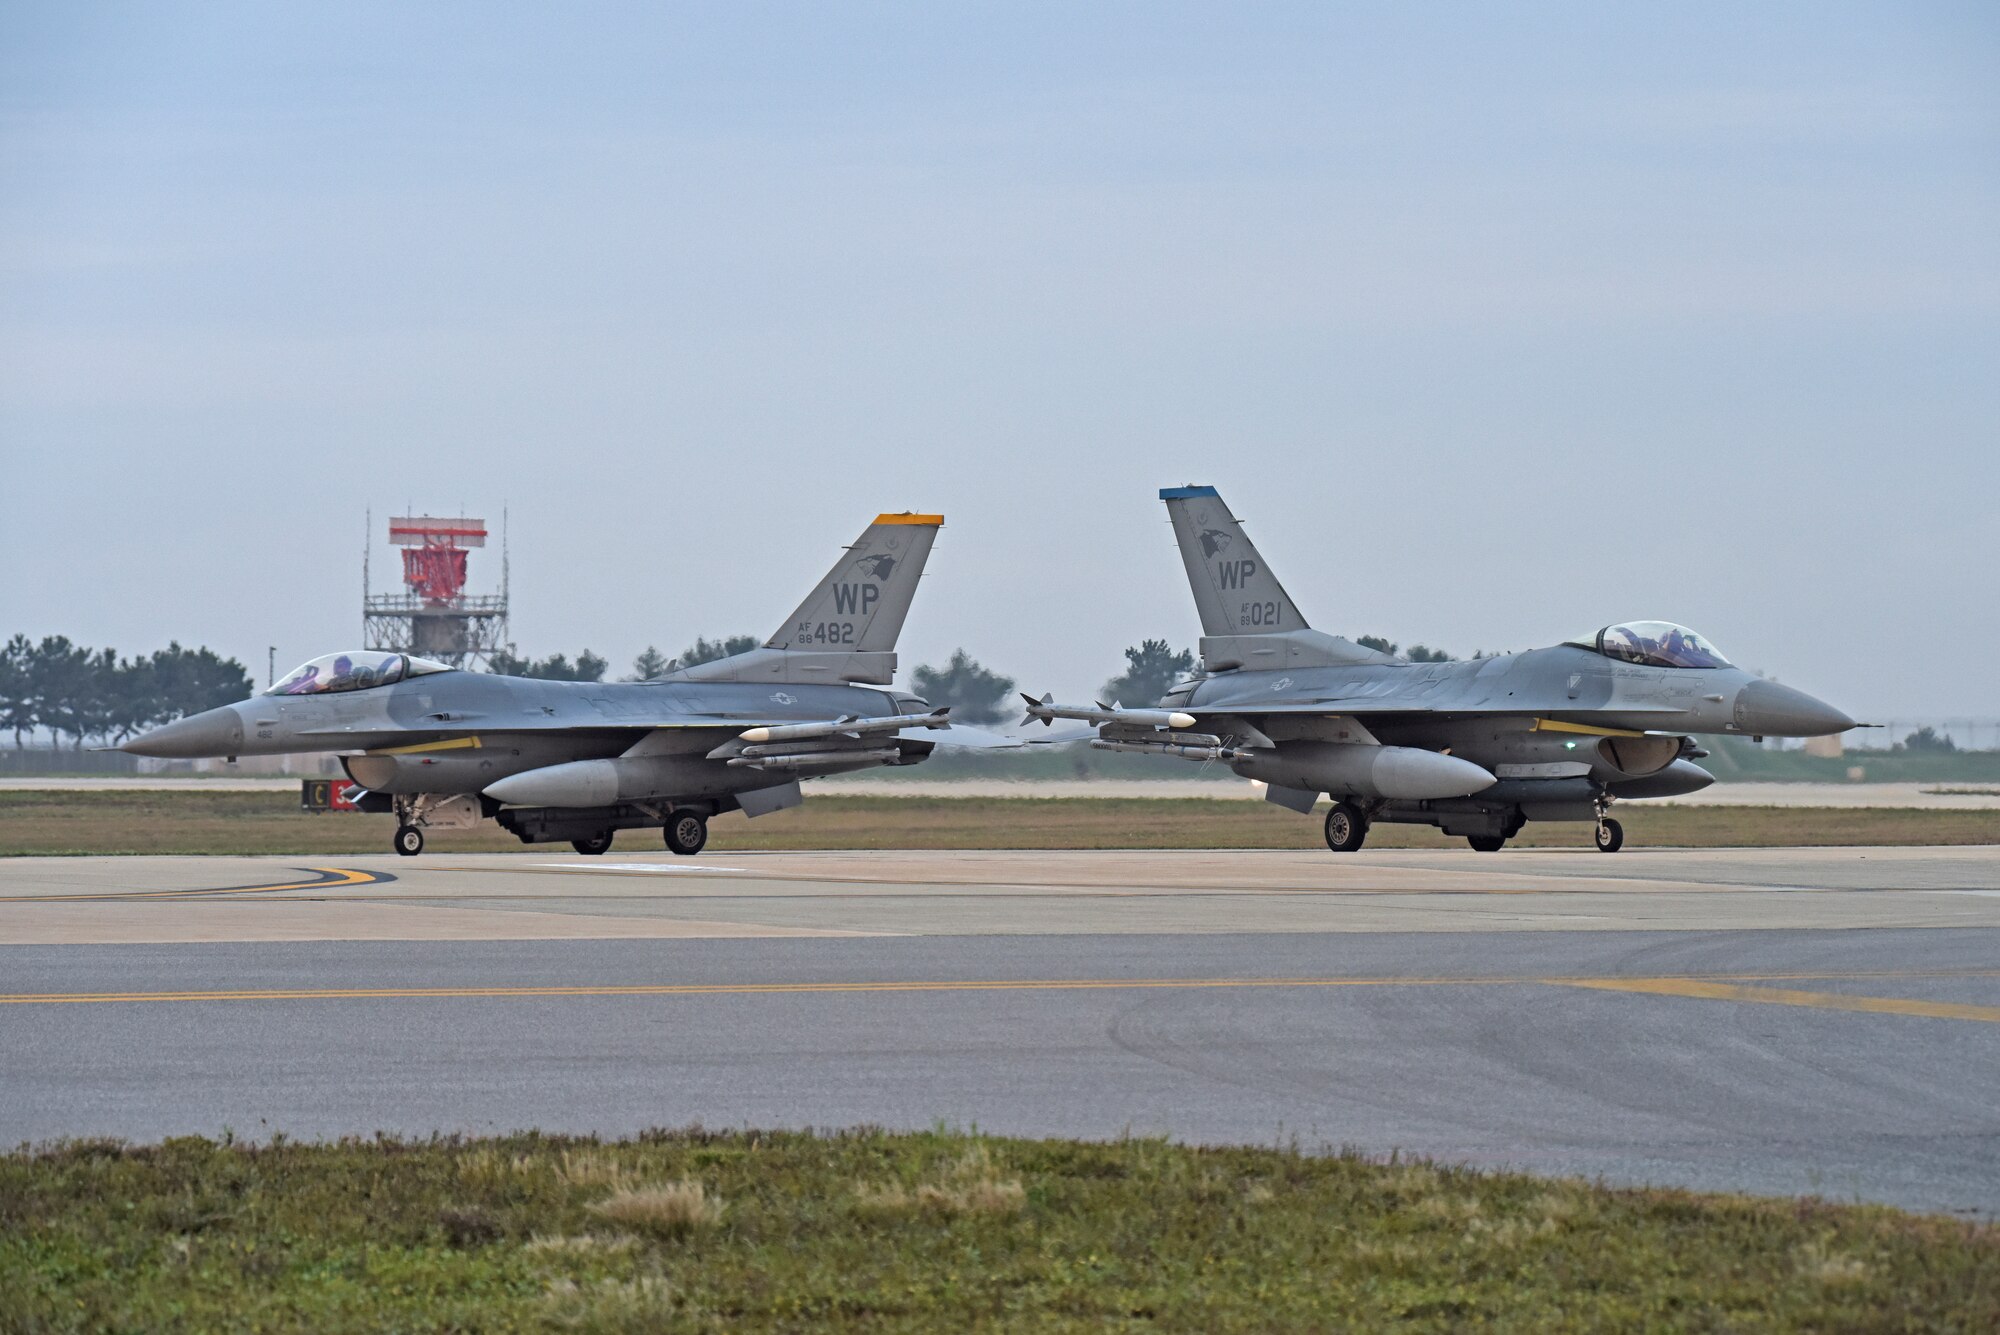 U.S. Air Force F-16 Fighting Falcons assigned to the 8th Fighter Wing prepare to take-off for a routine training flight at Kunsan Air Base, Republic of Korea, Oct. 10, 2019. The 8th FW is home to two fighter squadrons, the 35th Fight Squadron “Pantons” and 80th FS “Juvats.” They perform air and space control roles including counter air, strategic attack, interdiction and close-air support missions. (U.S. Air Force photo by Staff Sgt. Mackenzie Mendez)